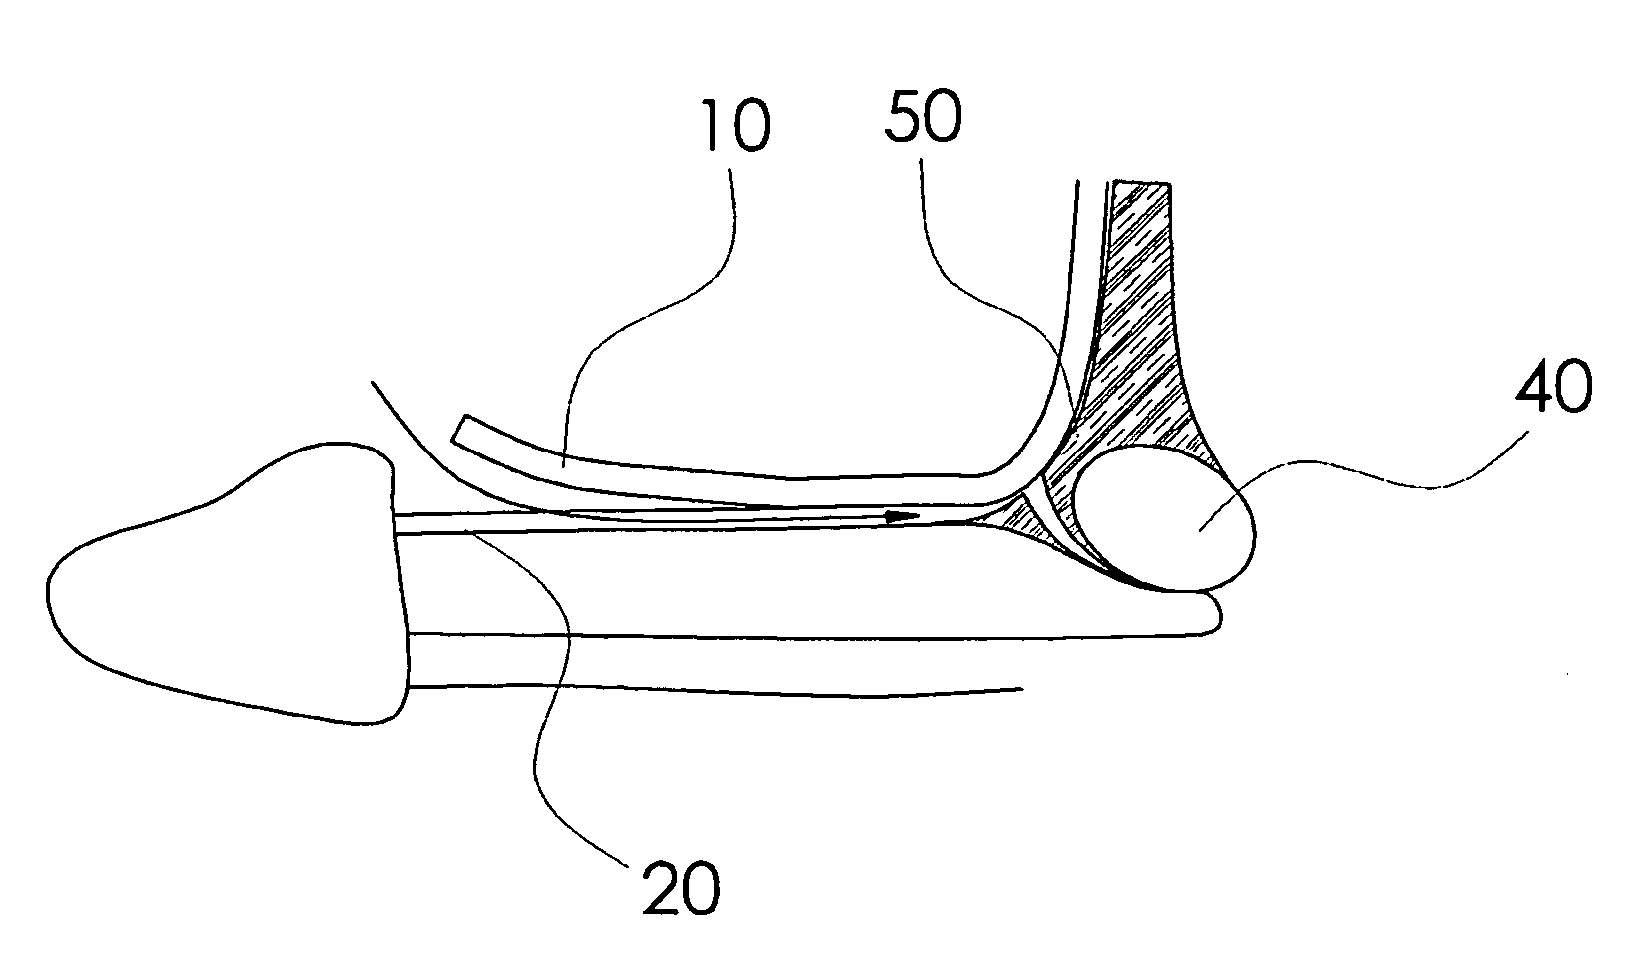 Method for complex phalloplasty with minimal incision